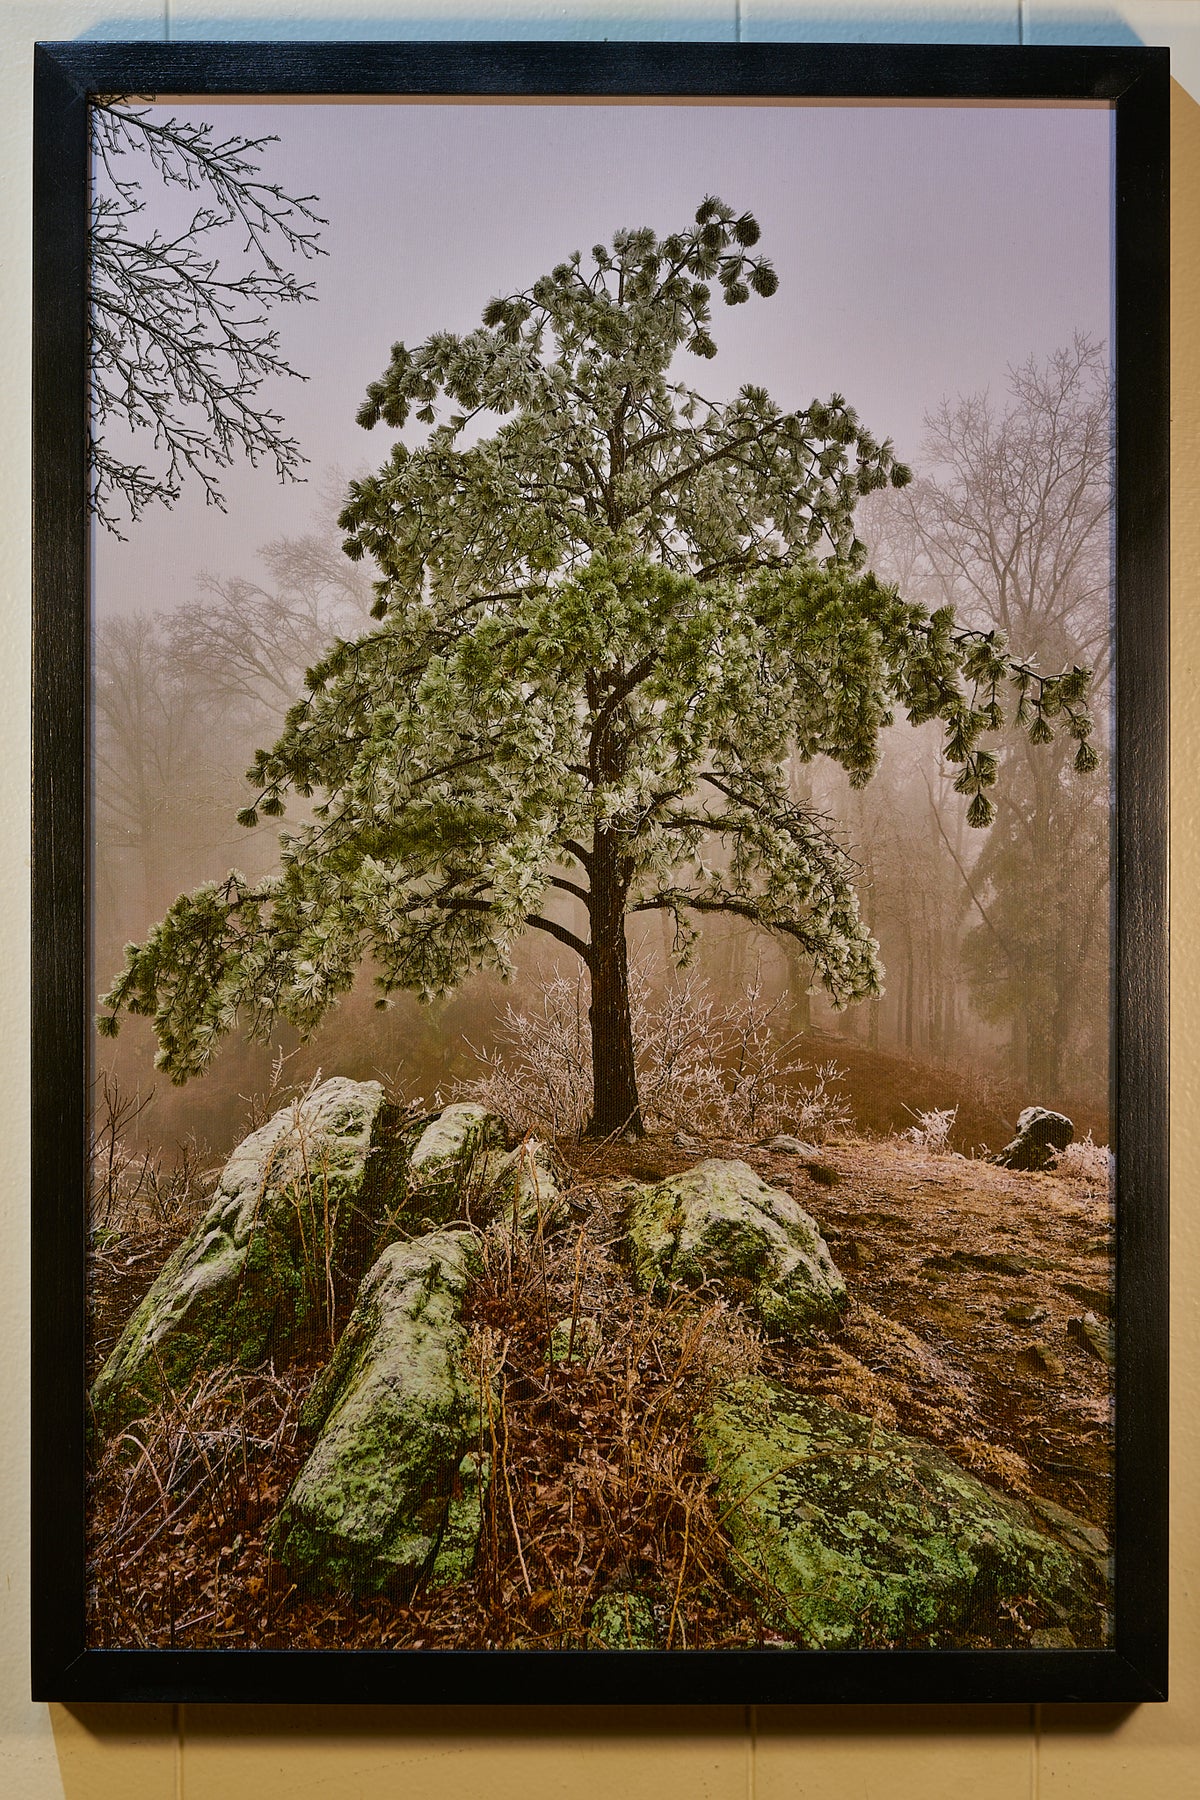 "Icey Pine" by Joe Rees - Framed Canvas Print - Online